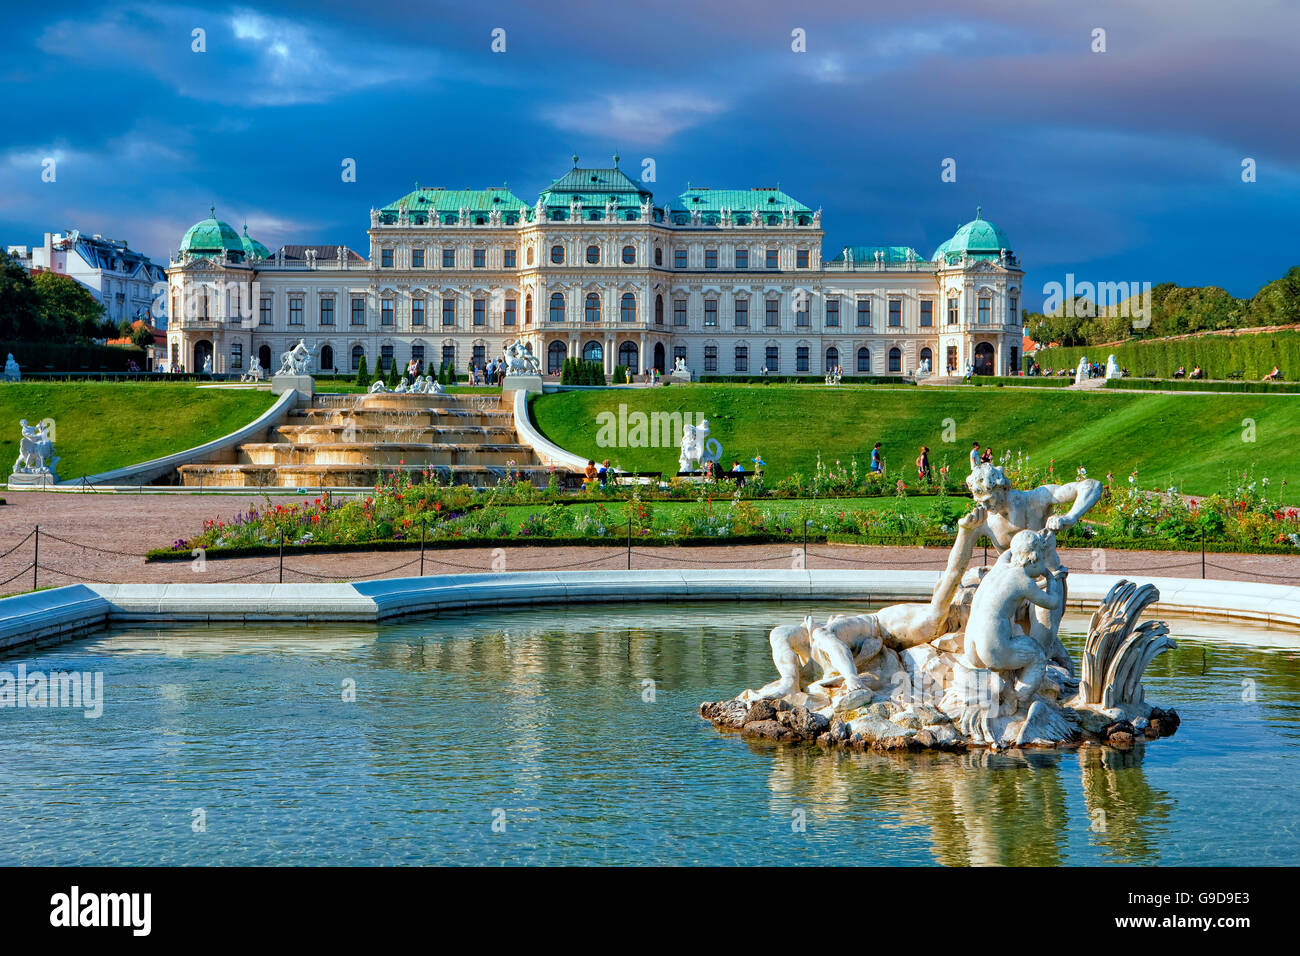 Belvedere palace in Vienna Stock Photo